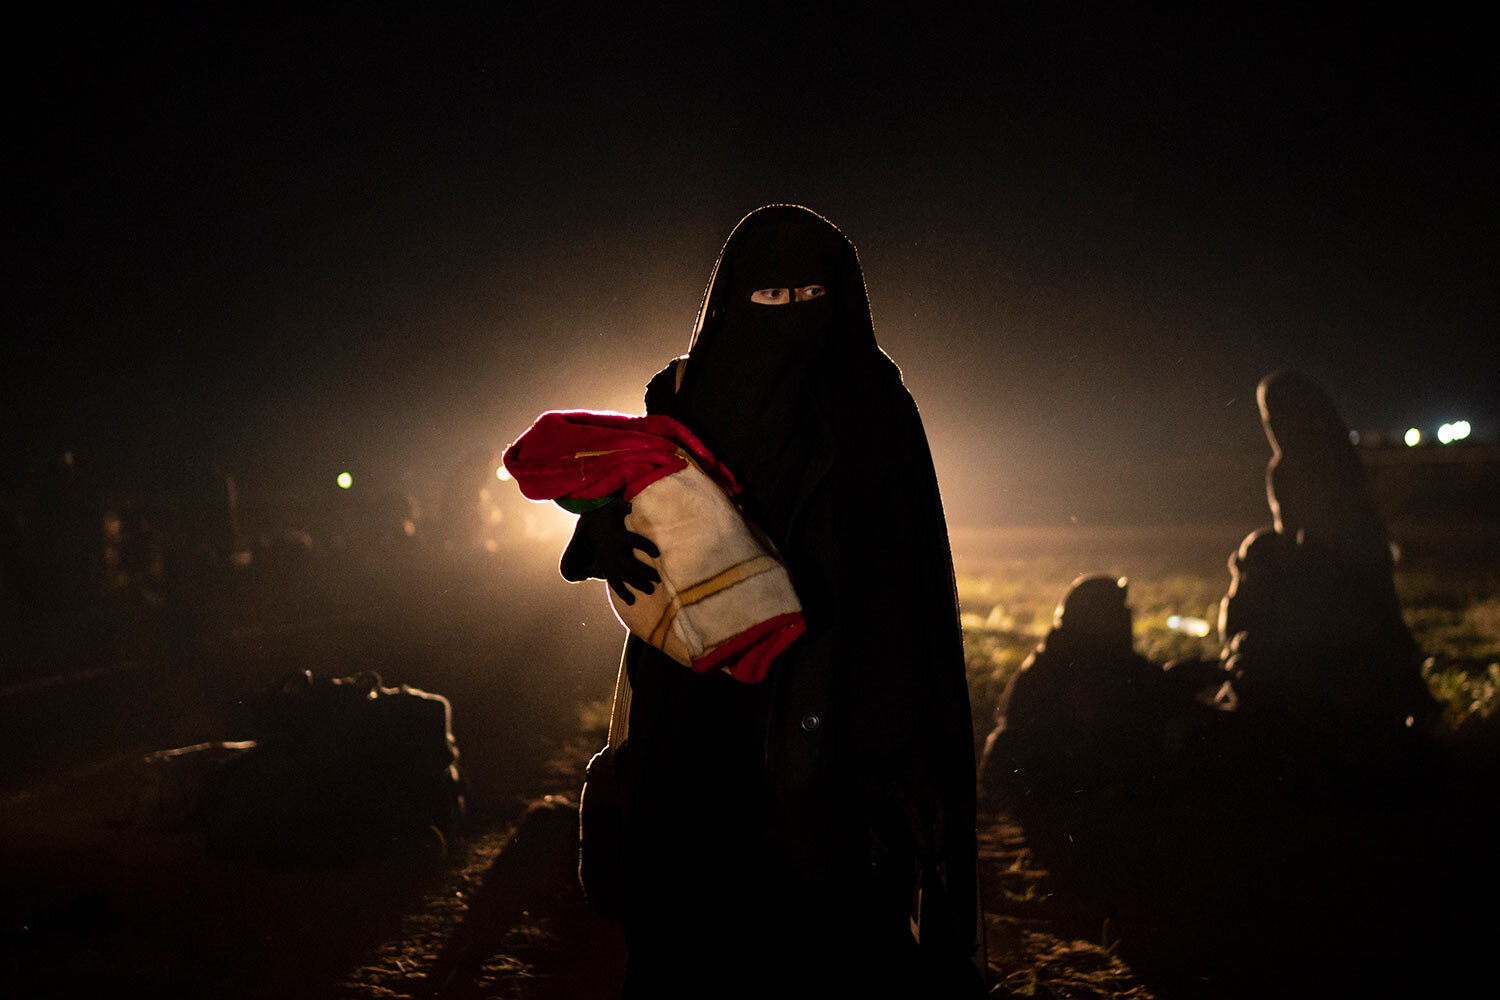  A woman who was evacuated out of the last territory held by Islamic State militants holds her baby after being screened by U.S.-backed Syrian Democratic Forces (SDF) in the desert outside Baghouz, Syria, Monday, Feb. 25, 2019. (AP Photo/Felipe Dana)